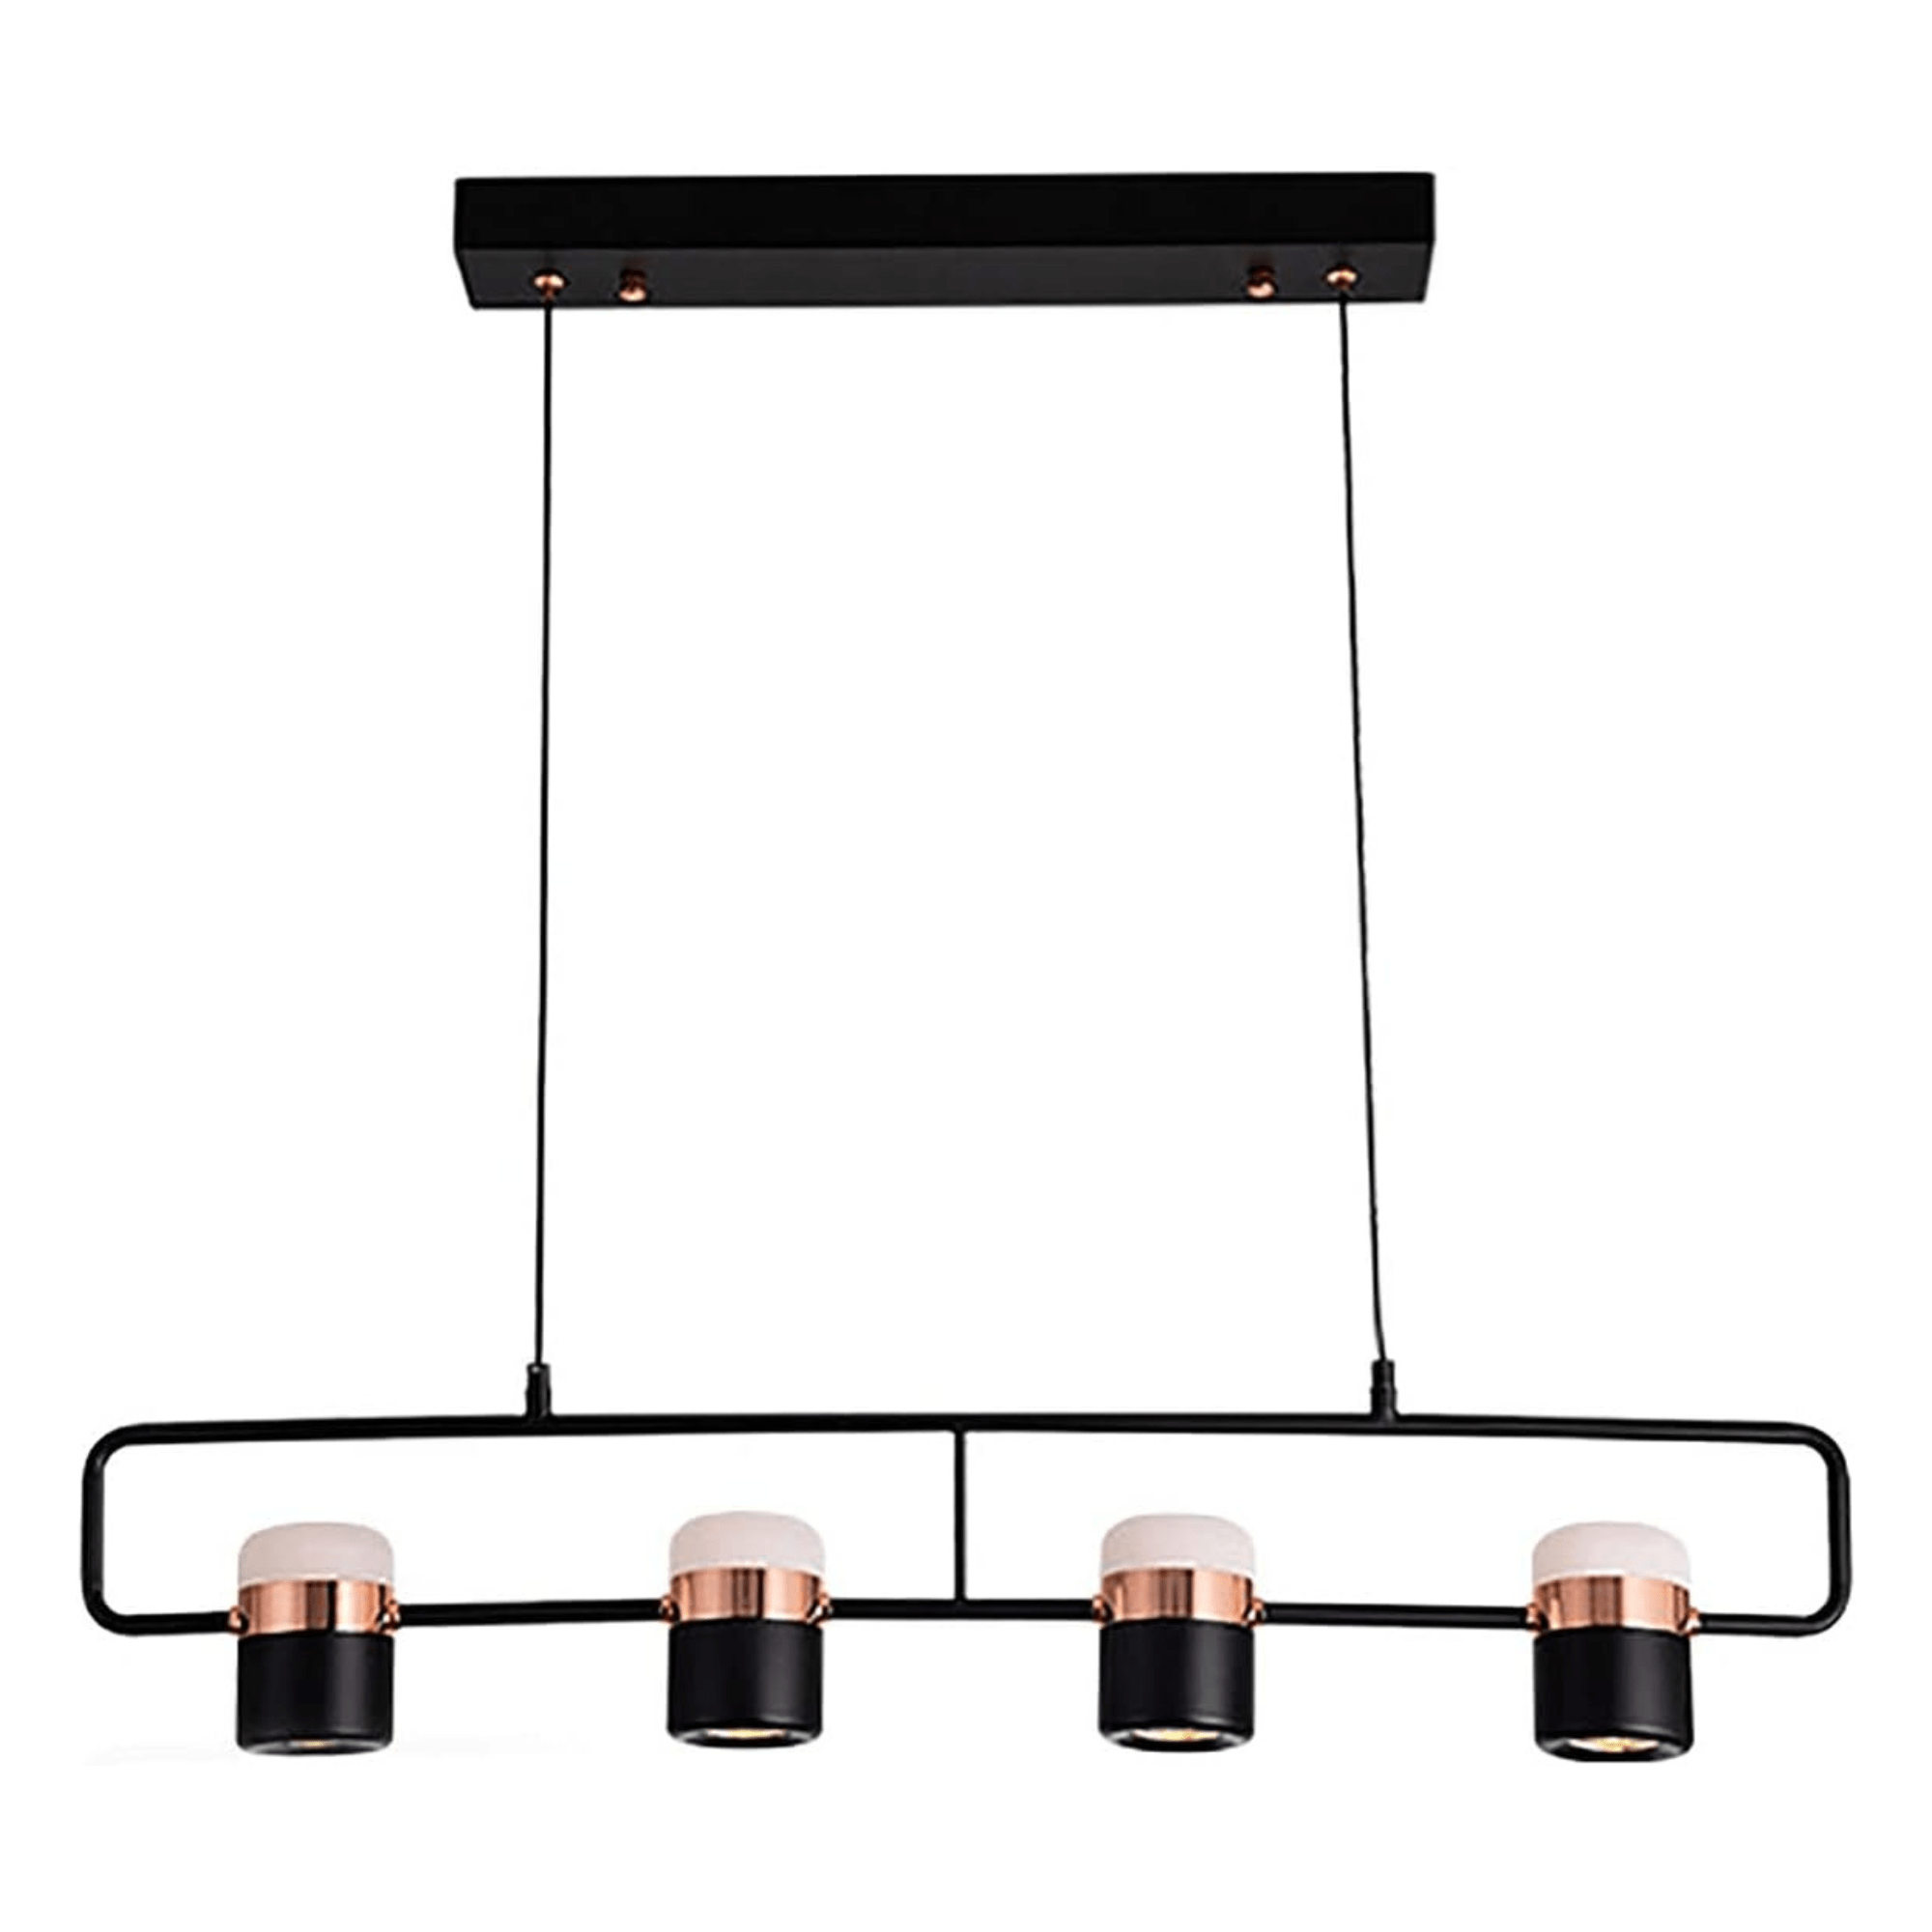 Buy Modern LED Linear 4 Head Track Light Pendant Chandelier 10W - CL-03 | Shop at Supply Master Accra, Ghana Lamps & Lightings Buy Tools hardware Building materials